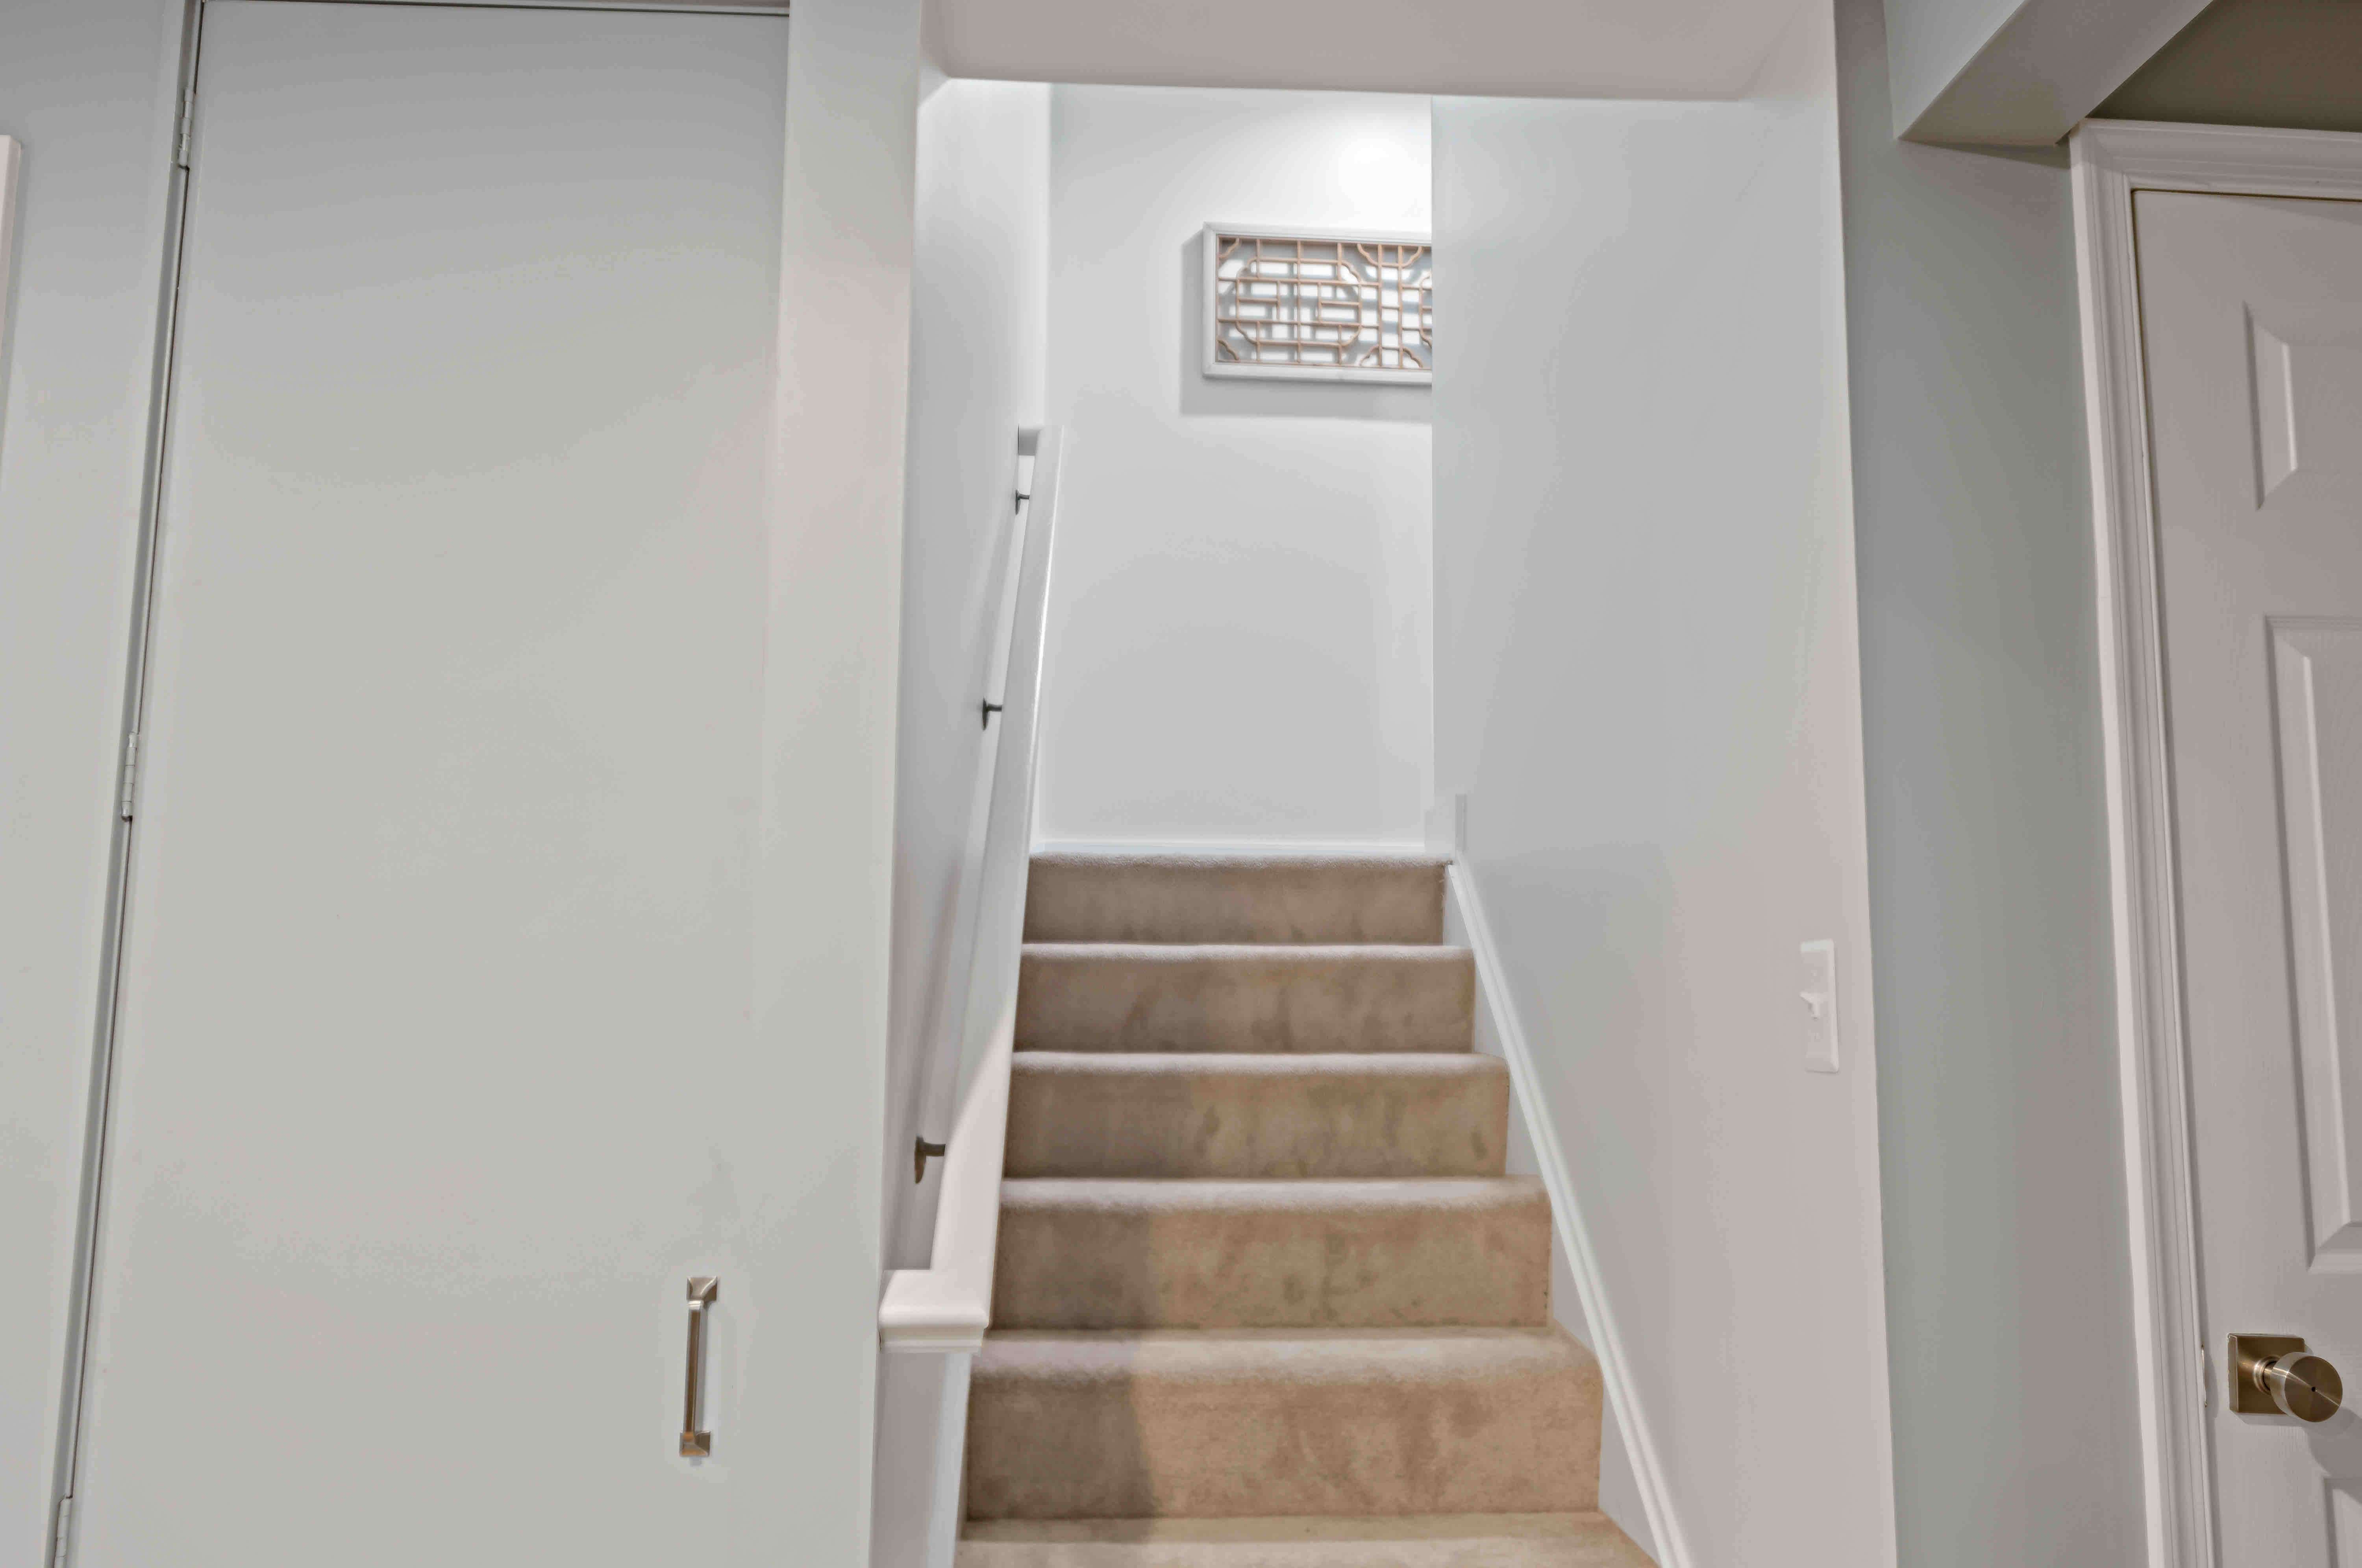 Beige carpeted stairs leading to the basement